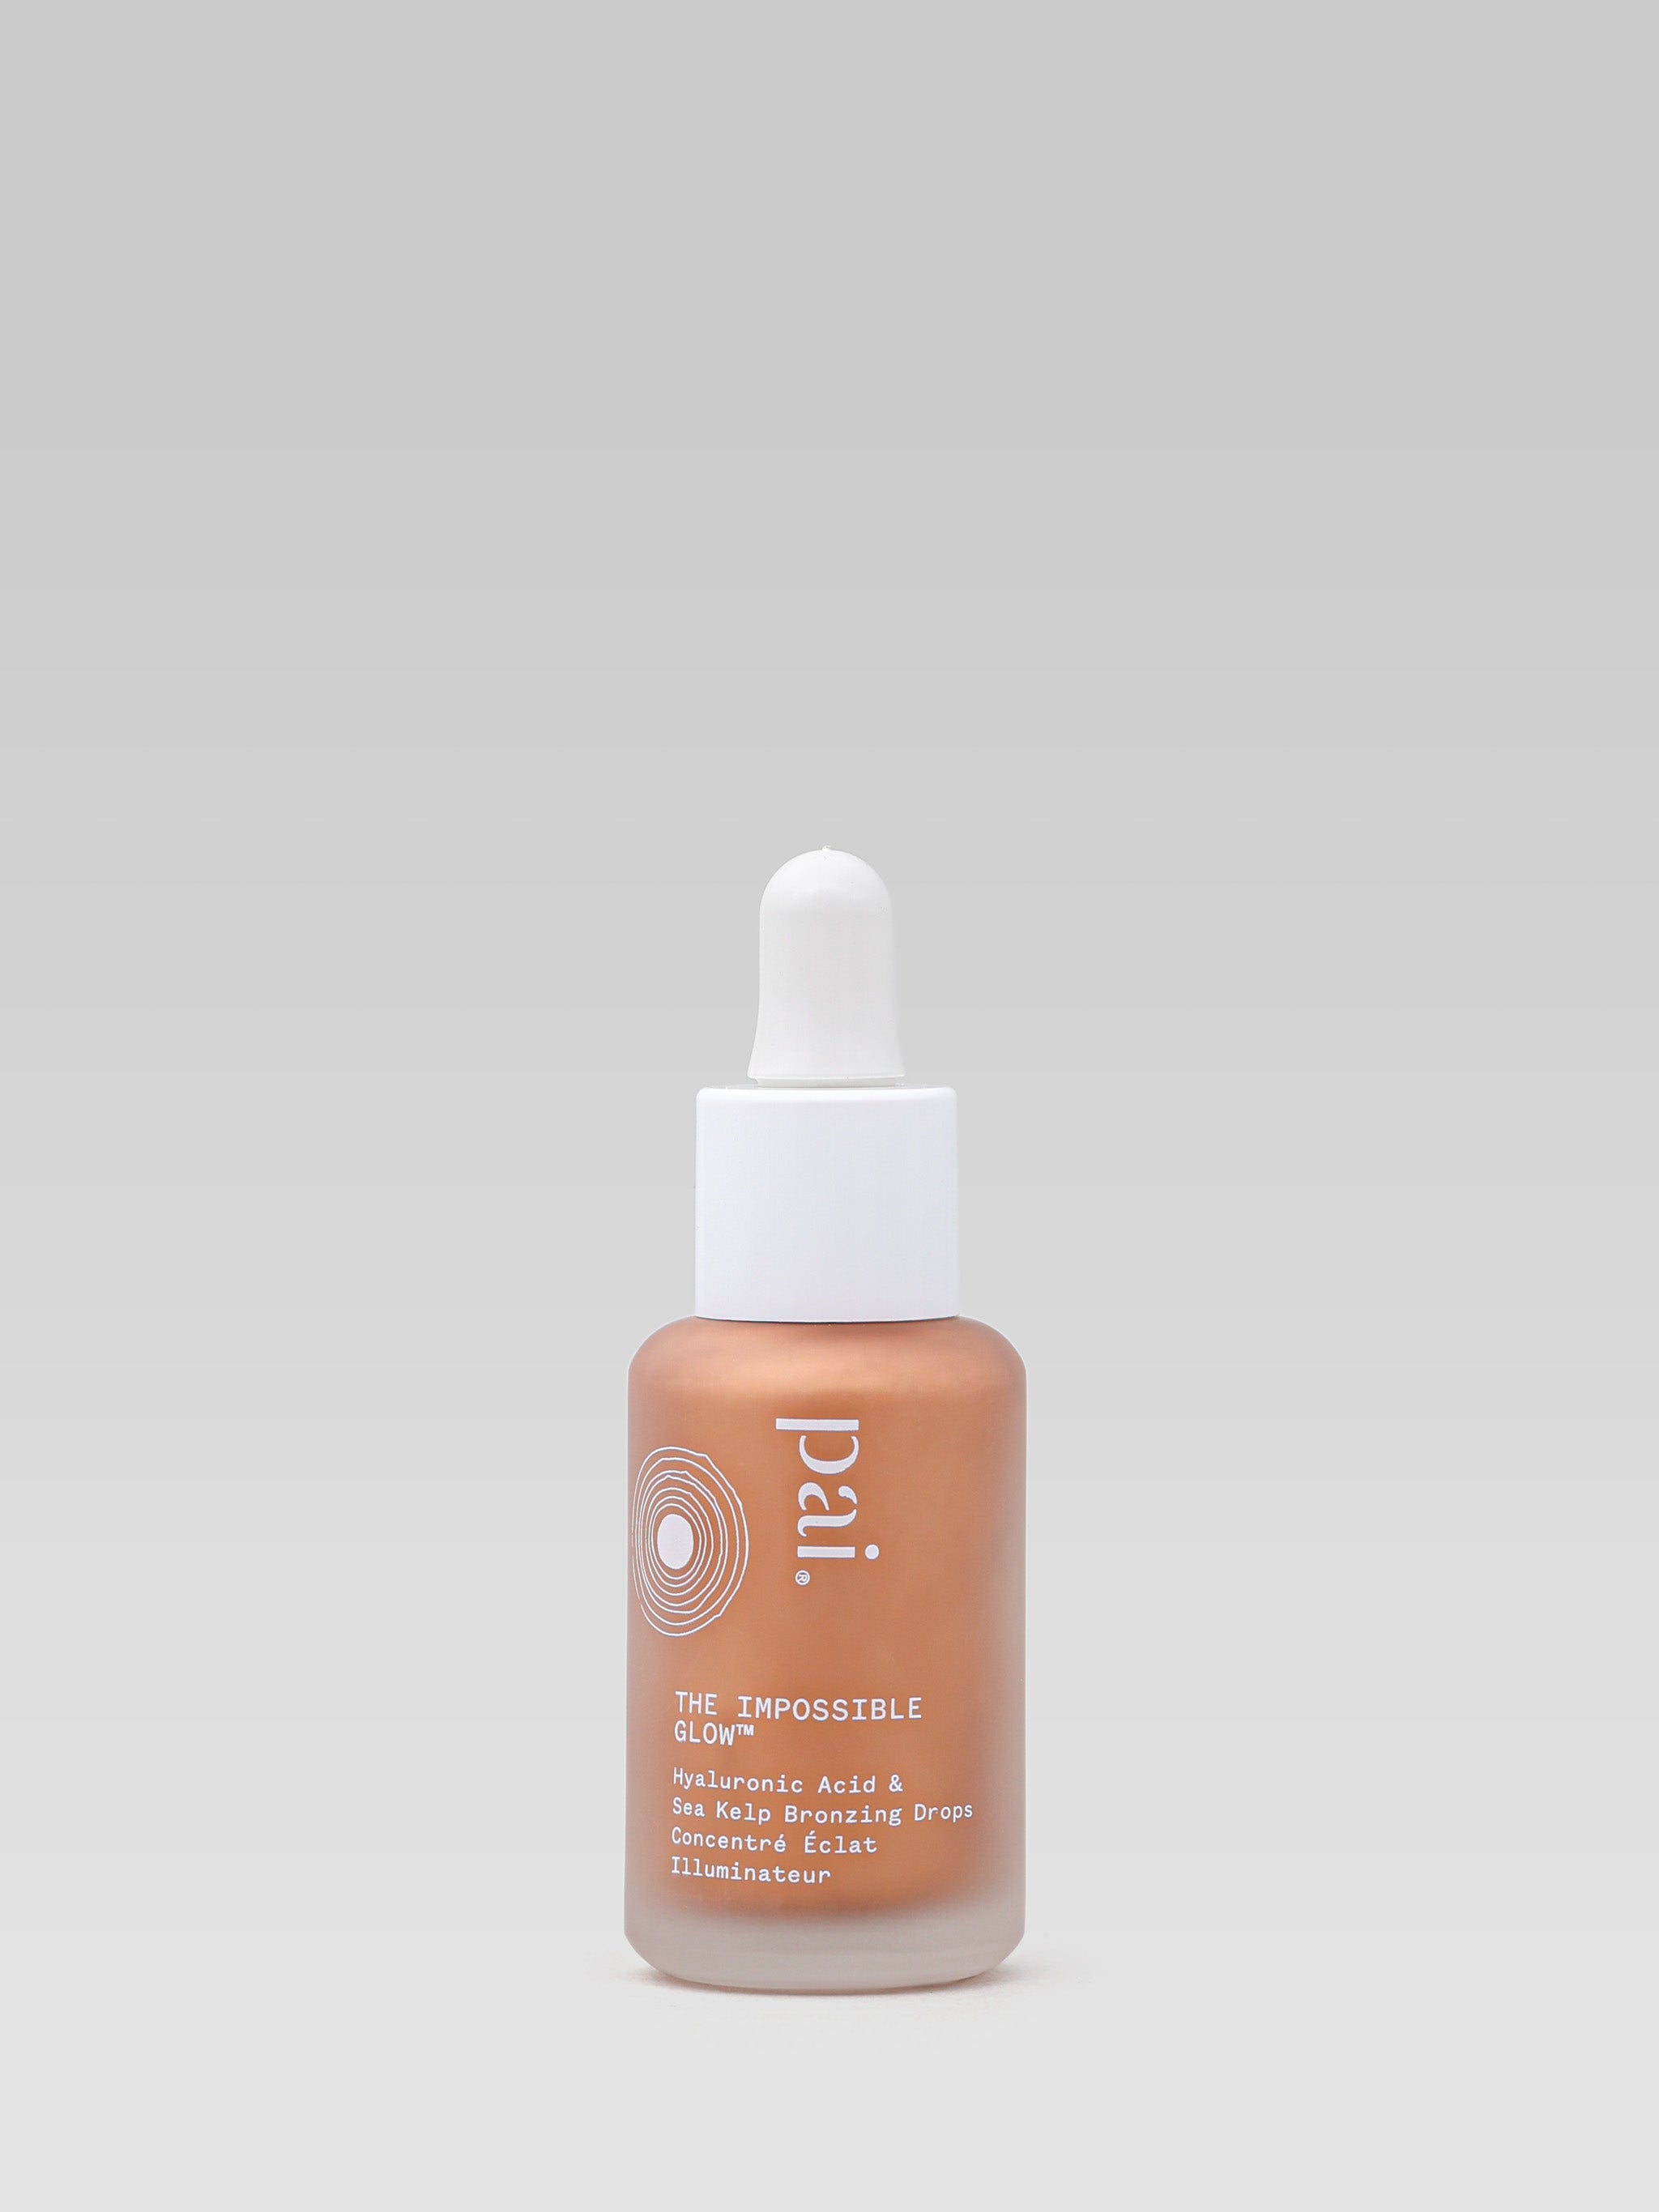 Pai Skincare The Impossible Glow Hyaluronic Acid and Bronzing Drops